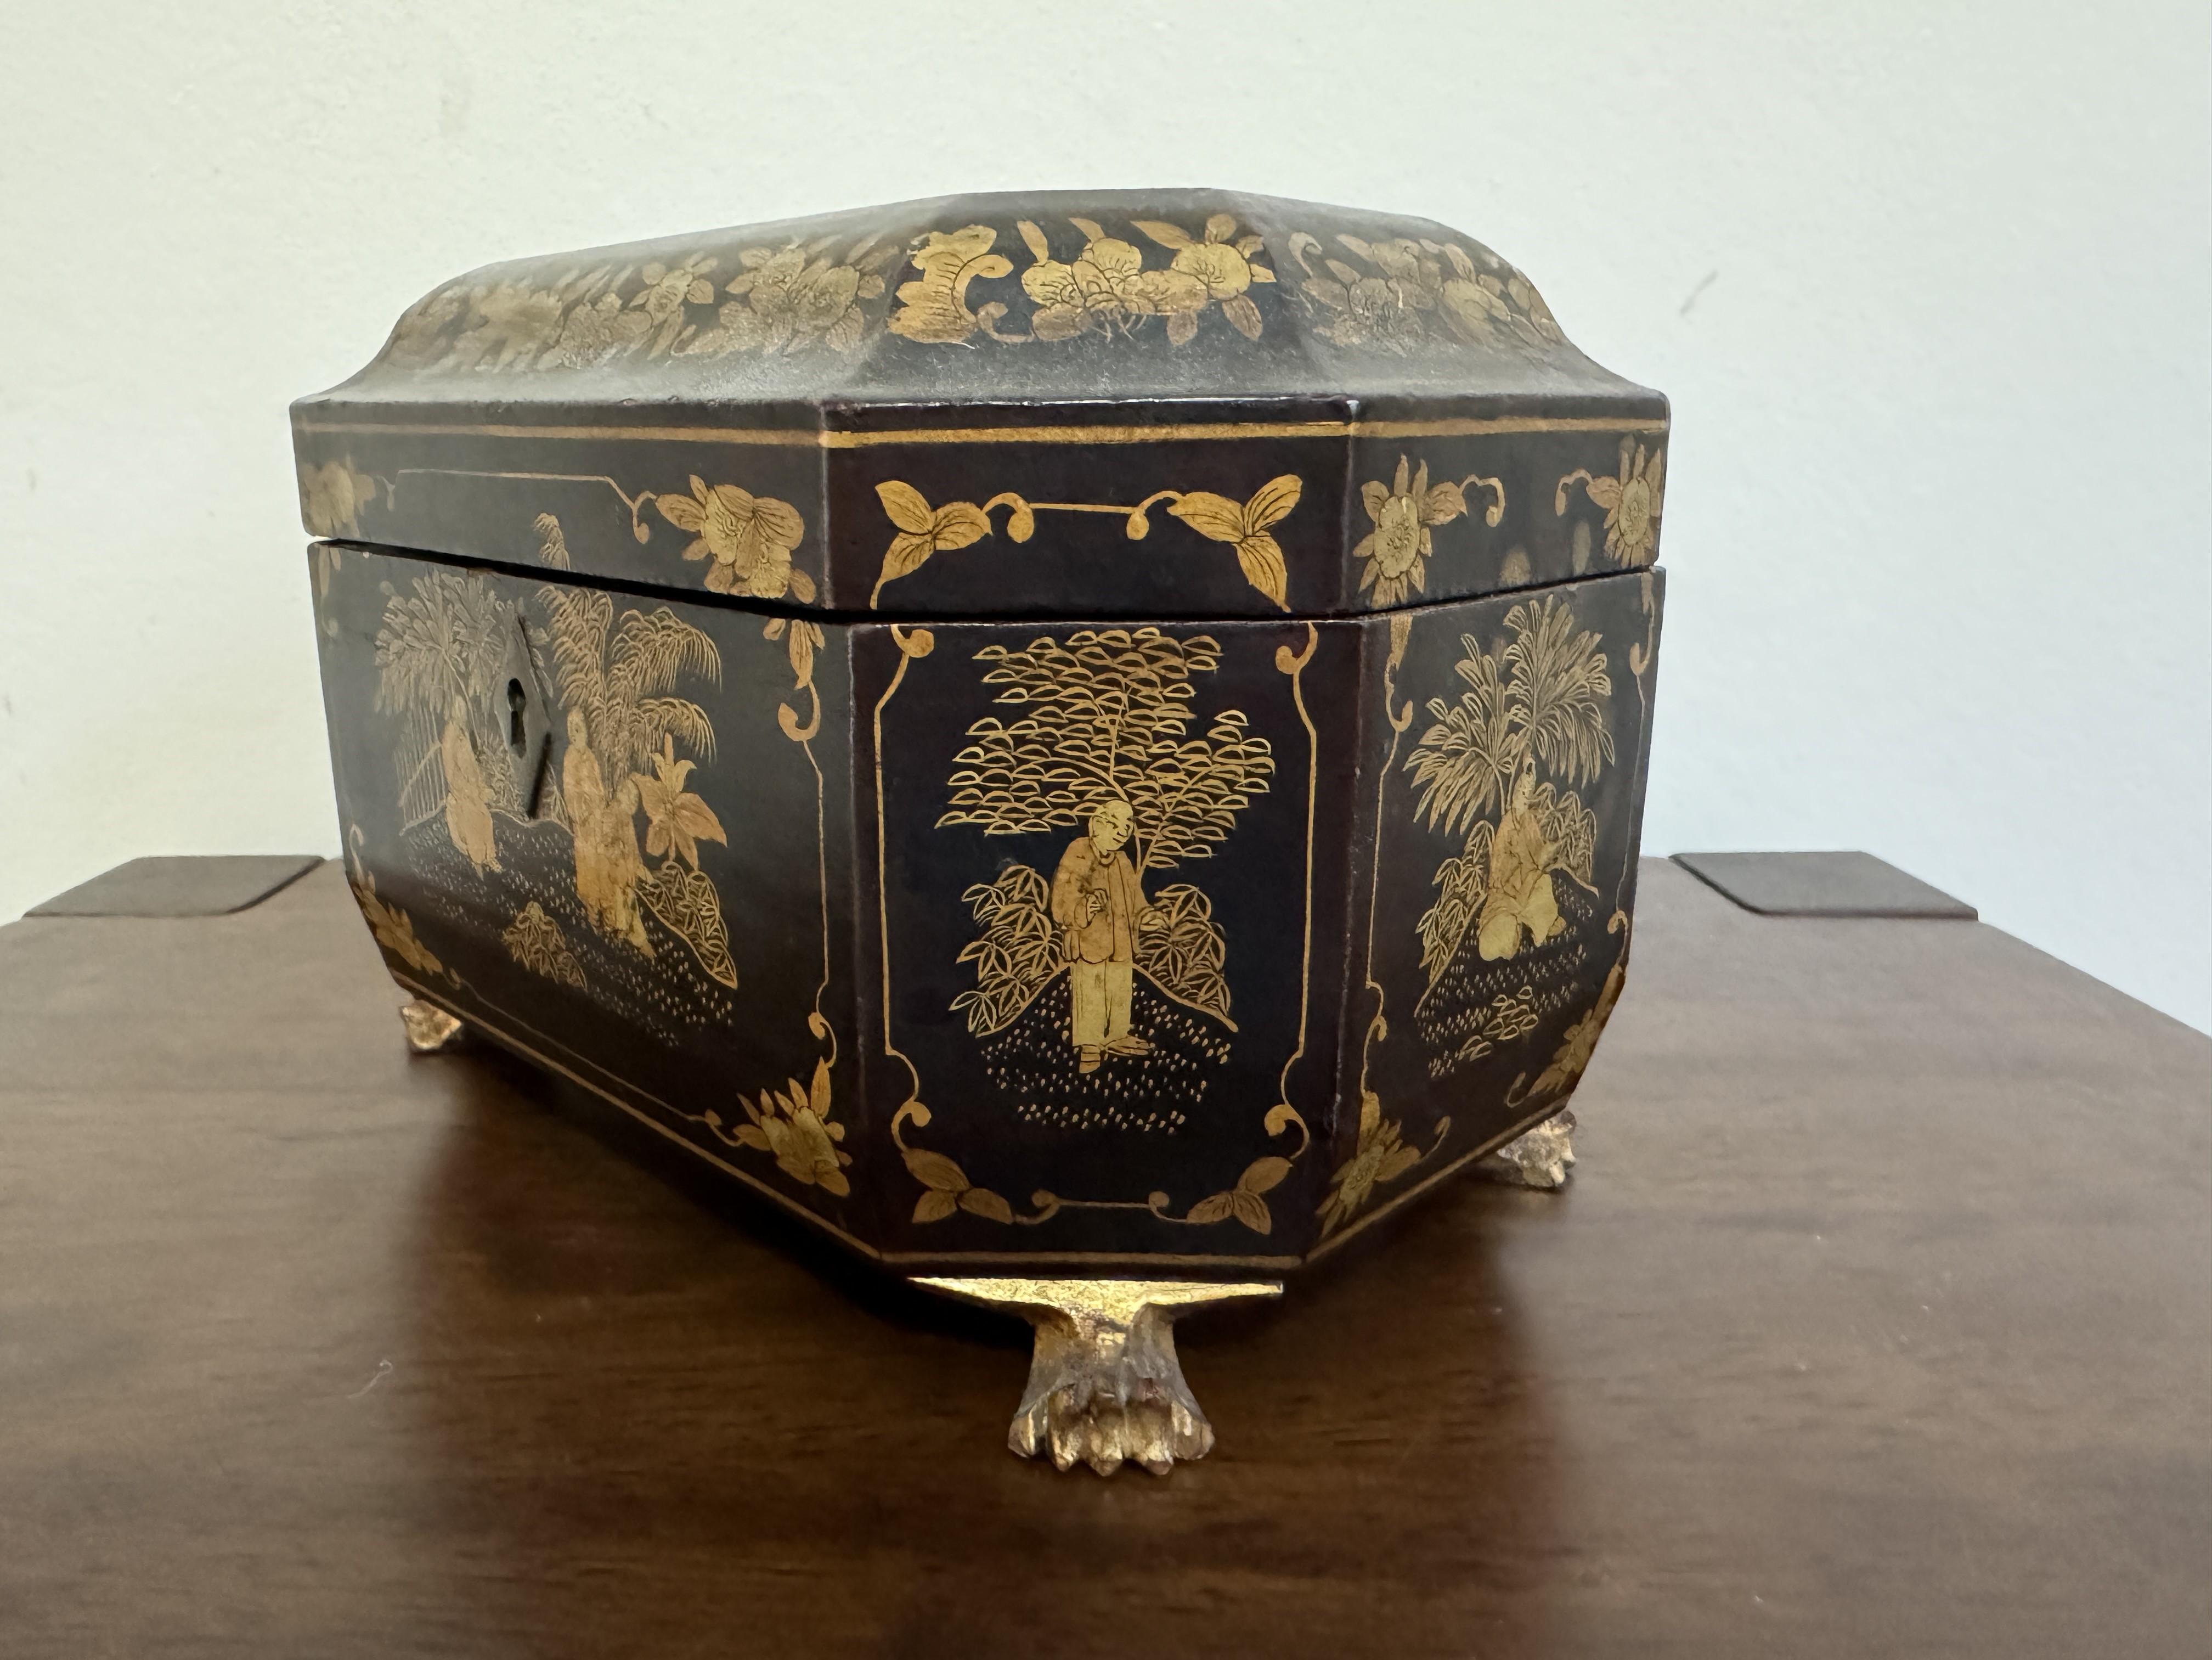 A 19th Century Lacquered Papier Mache Tea Caddy of rectangular form with an ogee moulded edge and canted corners decorated with chinoiserie figures and bands of flowers. Standing on gilded lion paw feet 8 ins x 5 ins x 5 ins (20 cm x 13 cm x 13 cm).